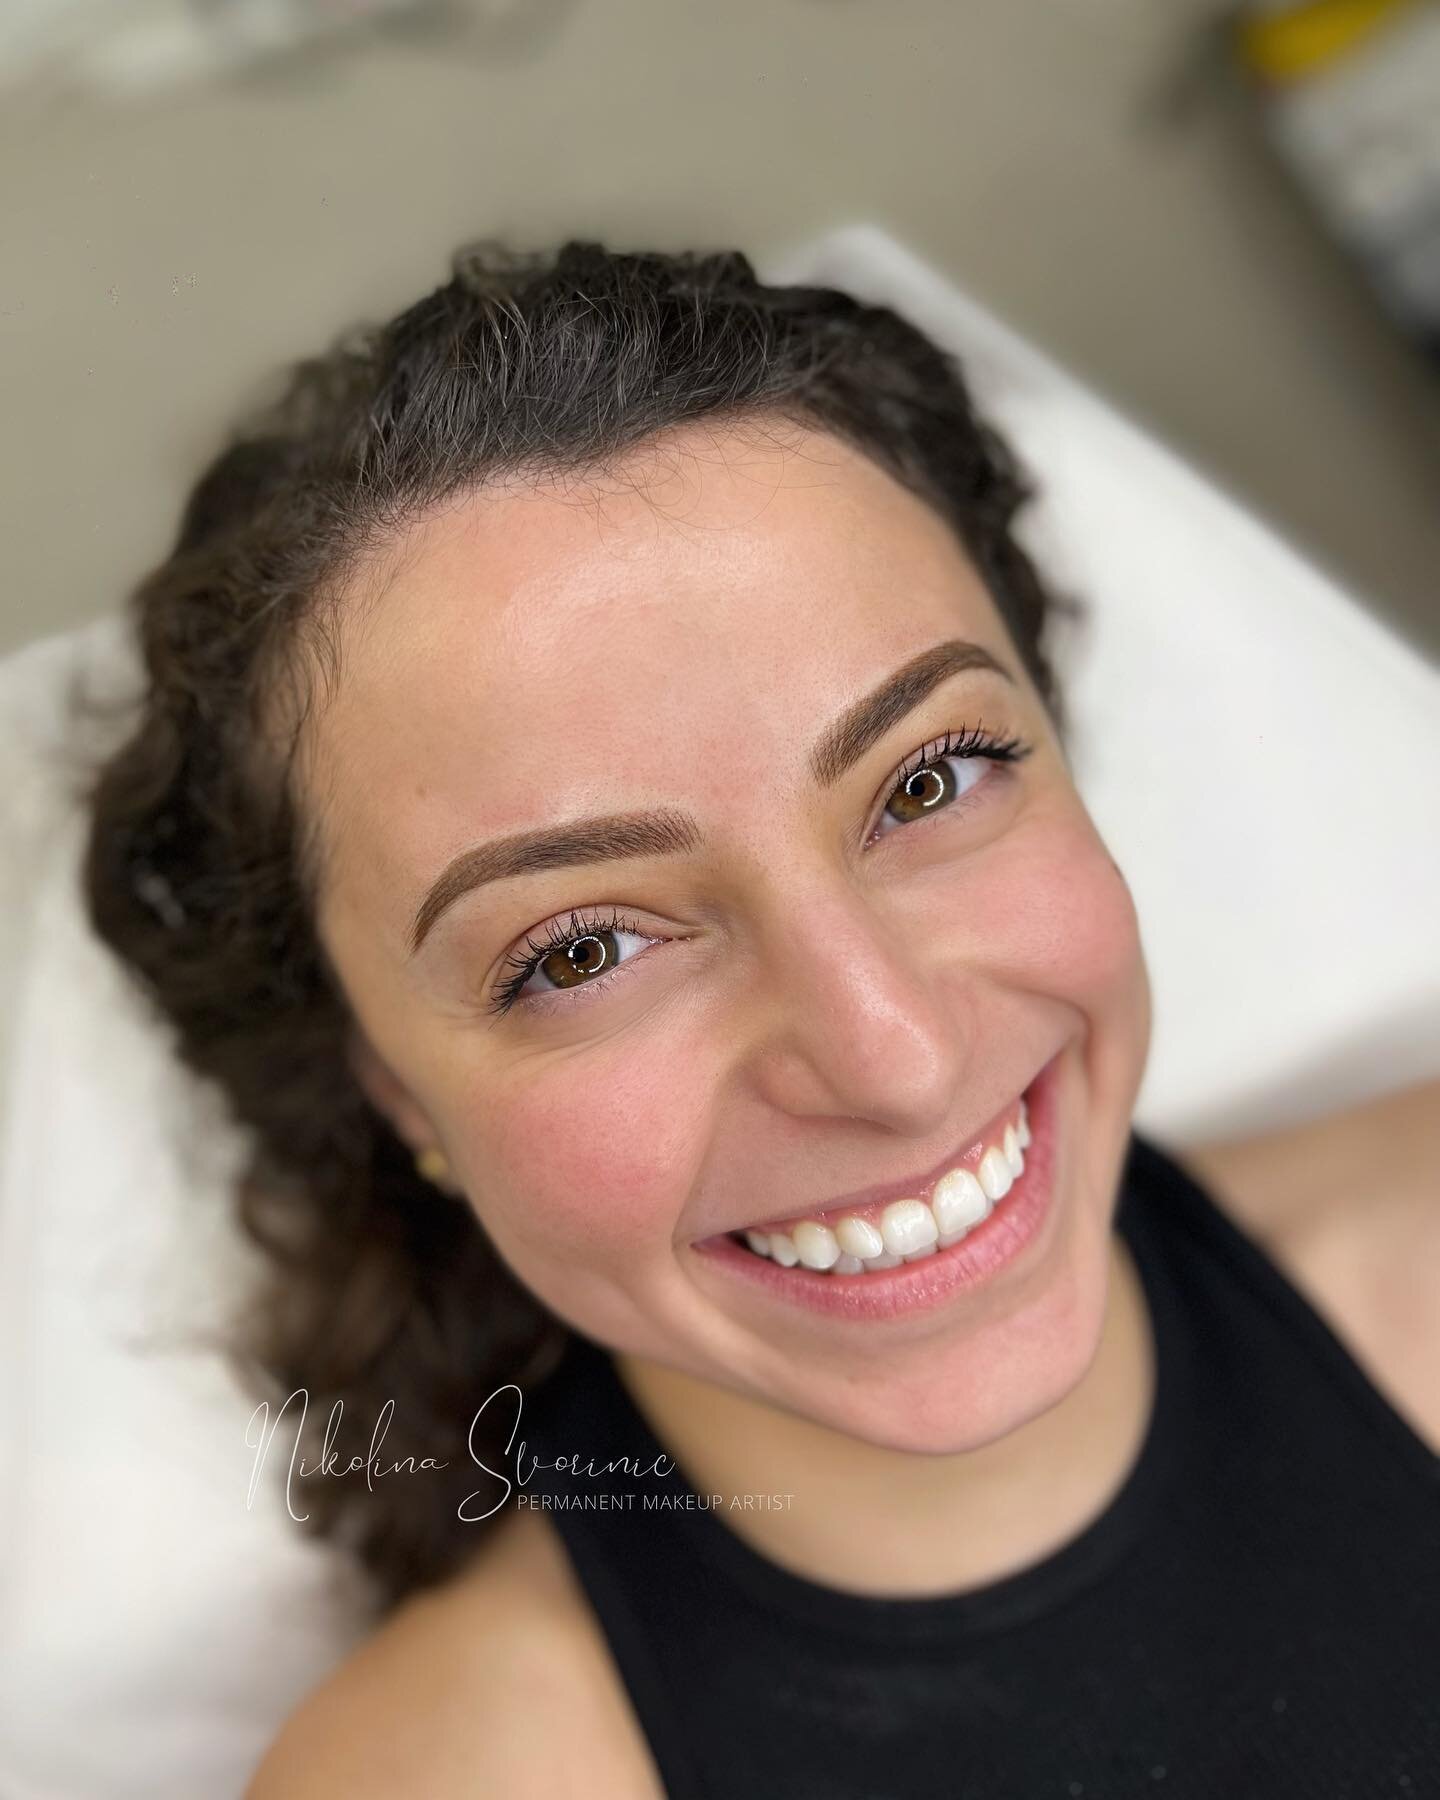 Look at our beautiful client Marise and that  S M I L E! 😃 

She came in for a consult and I recommended a powder brow because that was the best technique for her skin, to achieve better symmetry and her goals. 🌿

Swipe to see her before and after 